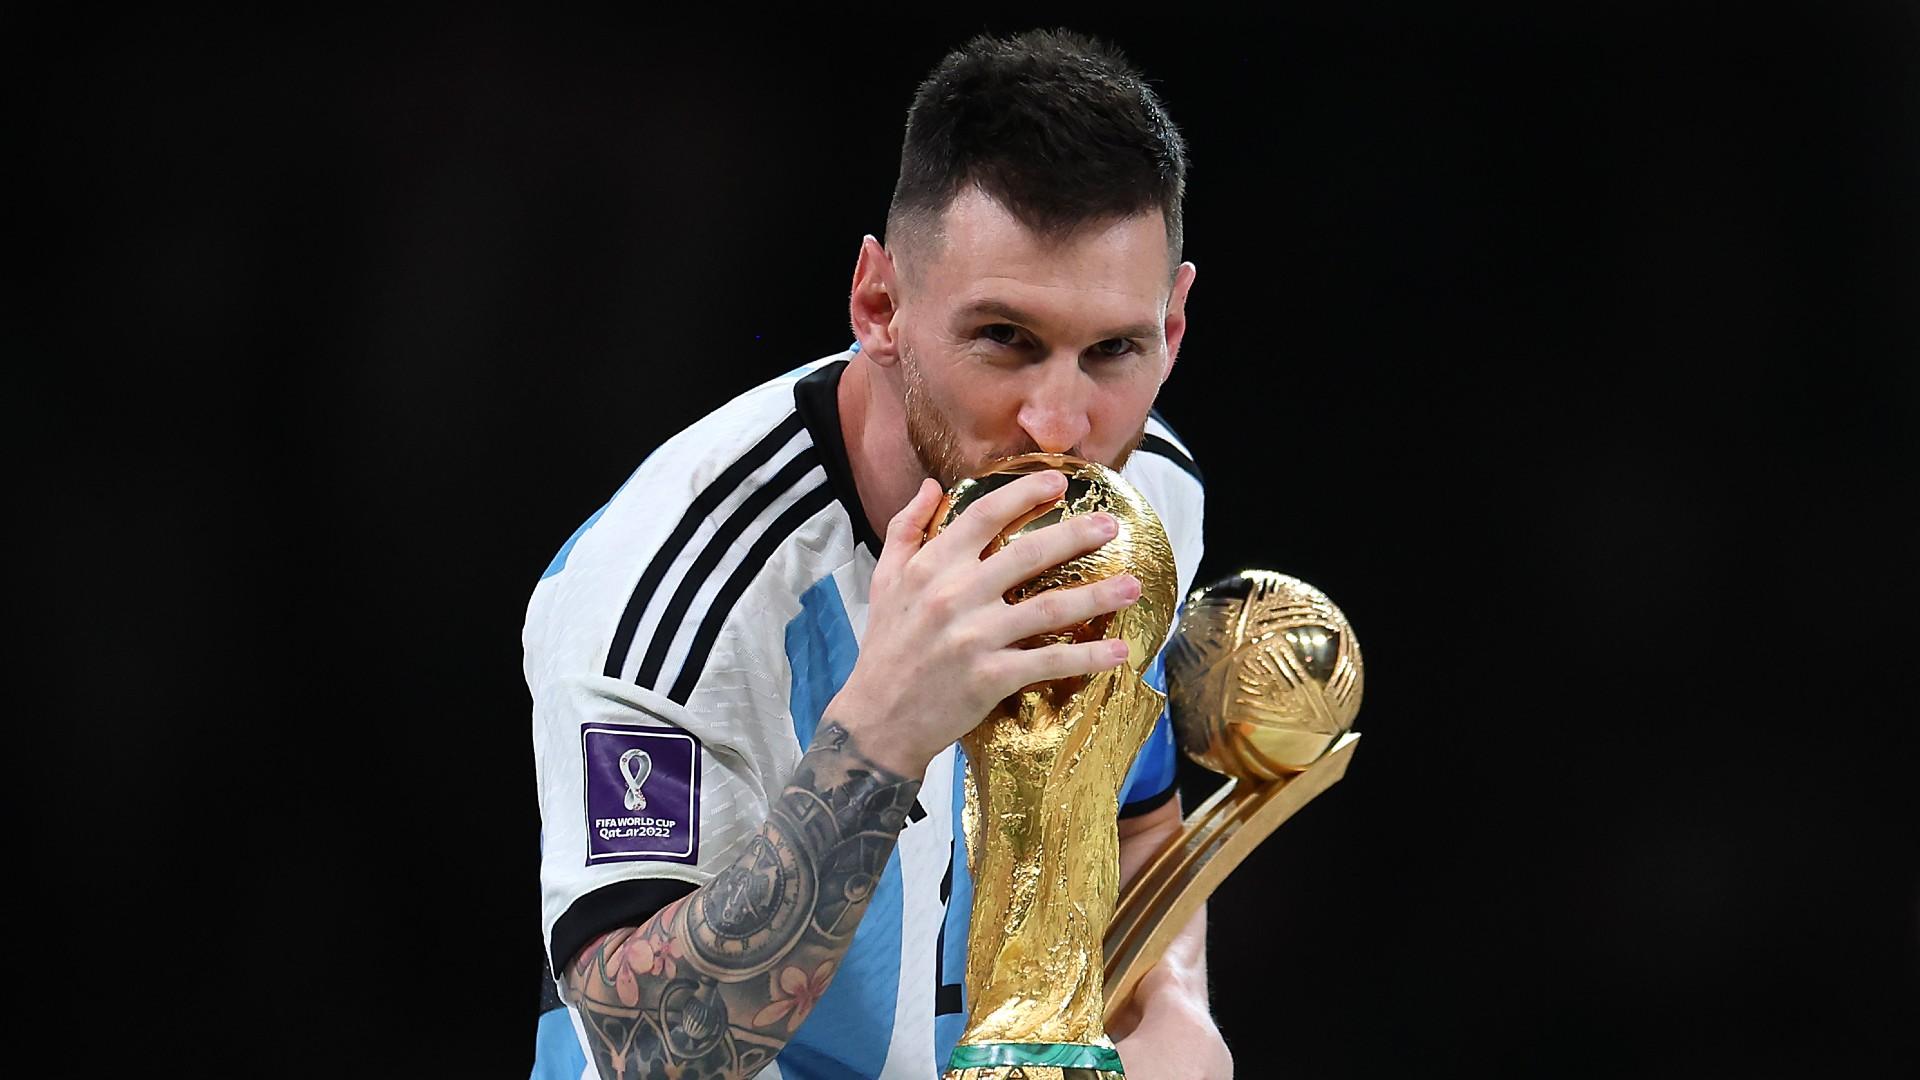 Finally, Lionel Messi lifts World Cup trophy: Emotions, tears, joy for Argentina captain's crowning achievement in potentially his last FIFA tournament